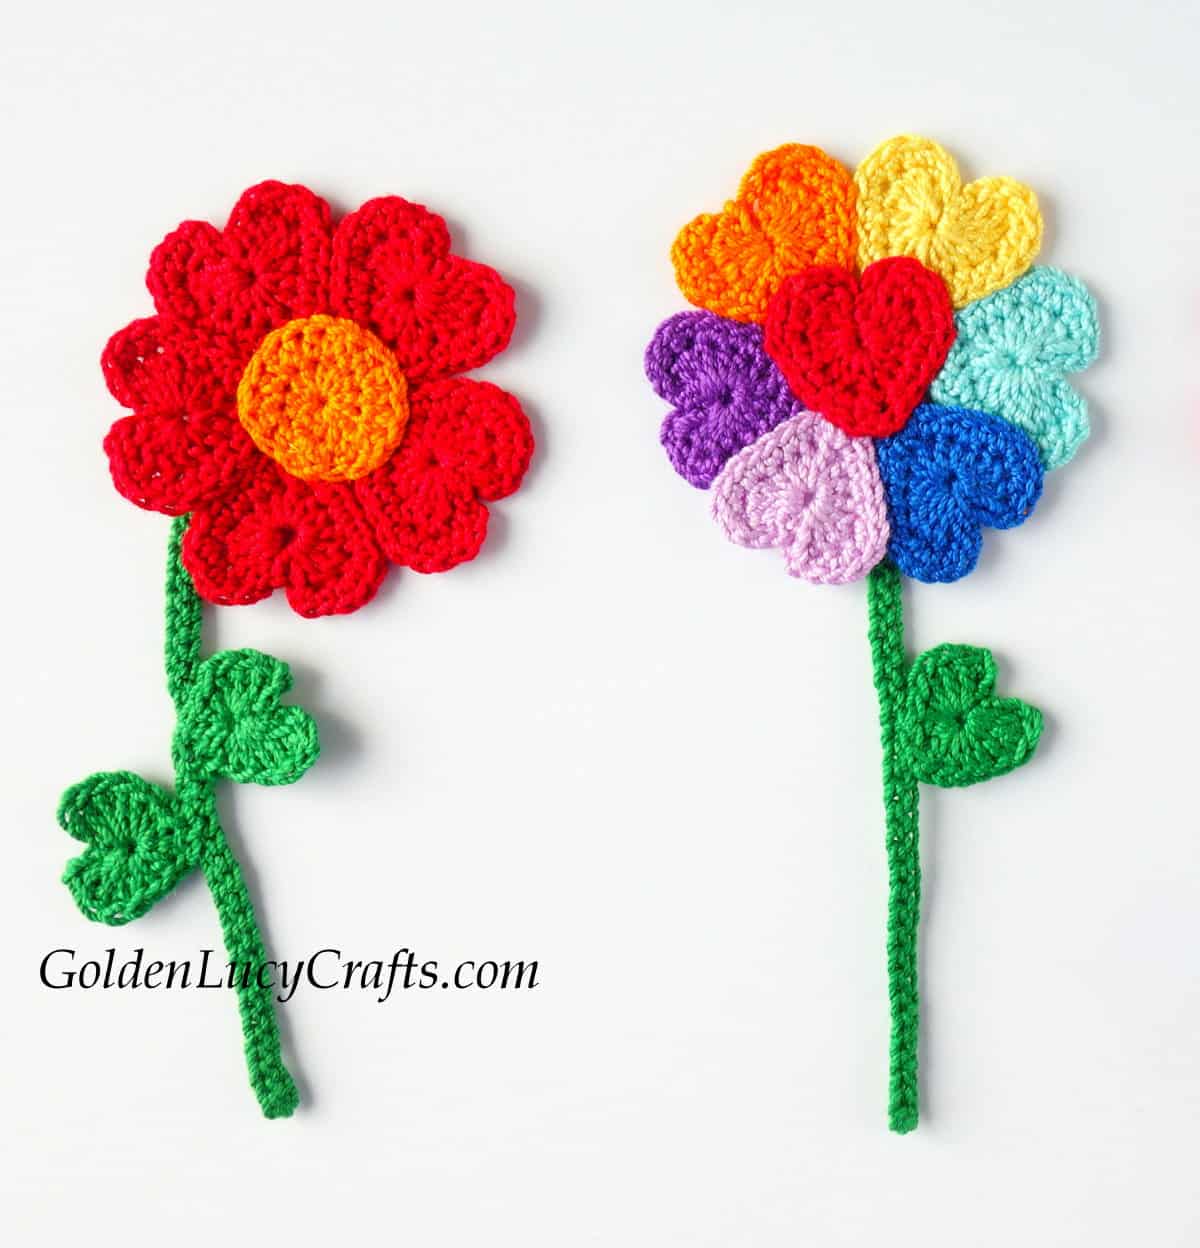 Crochet flowers made from hearts.